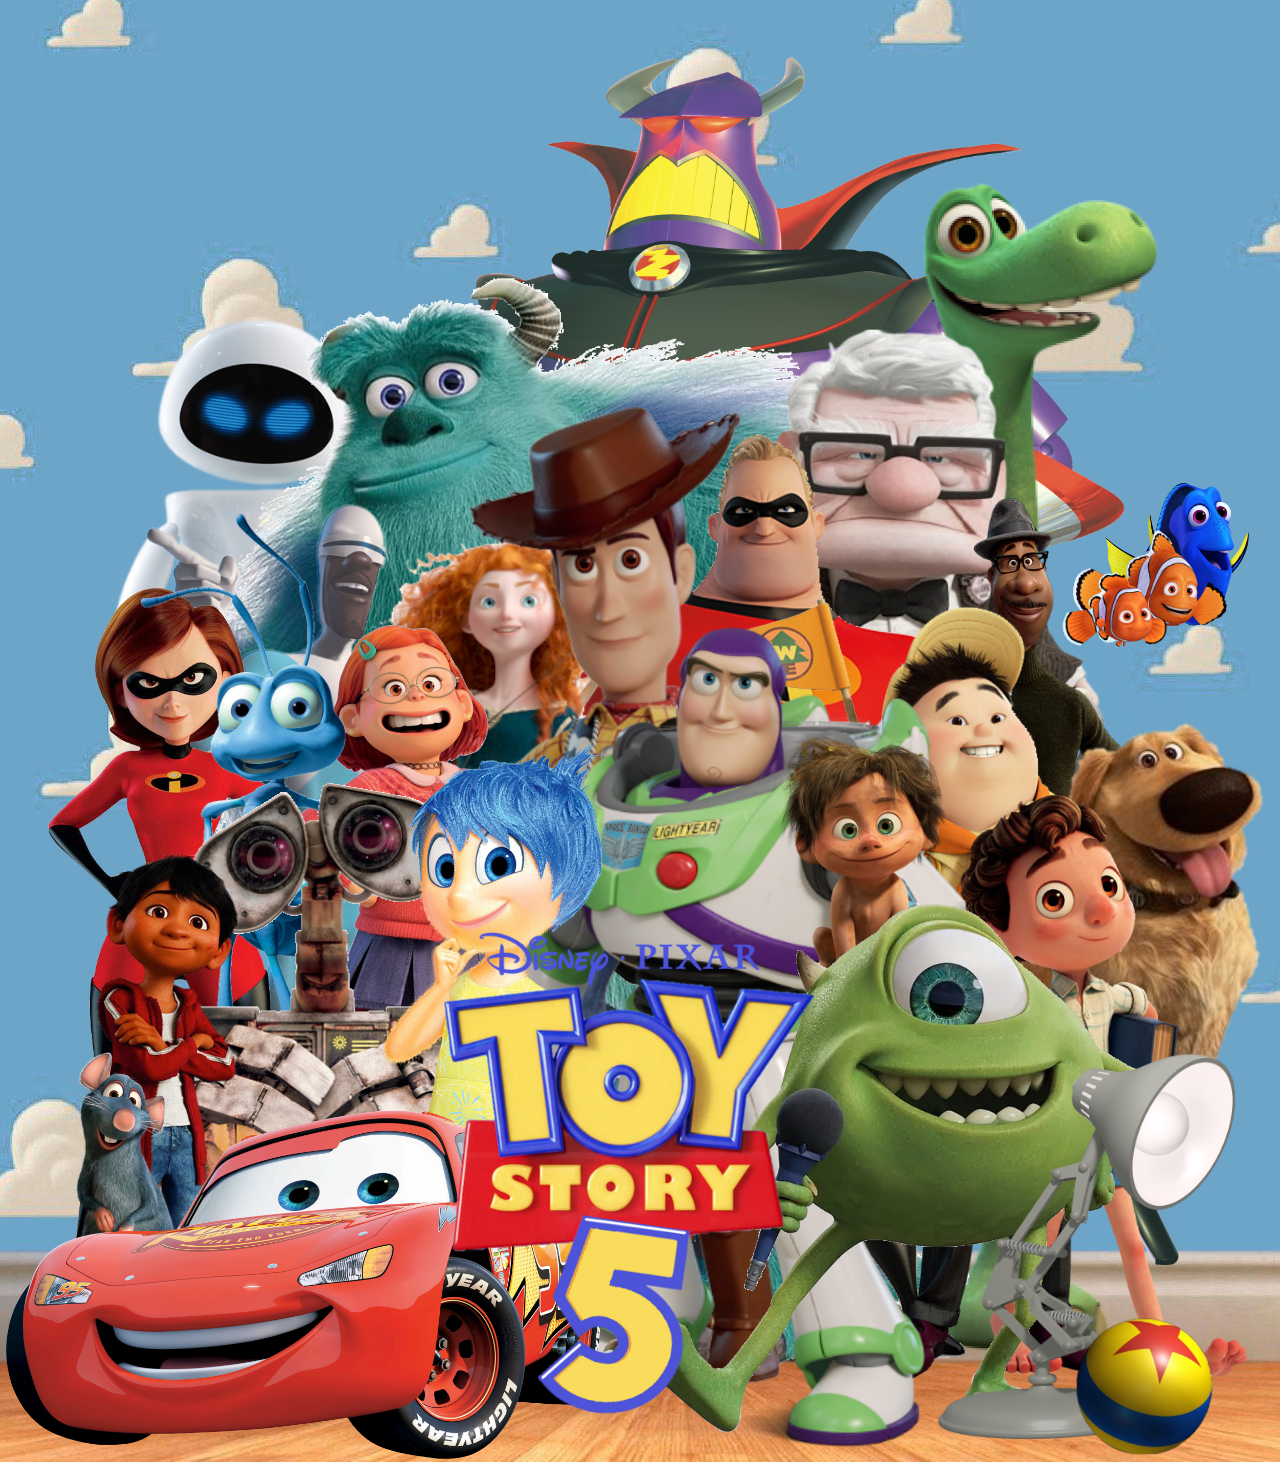 11 Missing Characters Who Need To Return For Toy Story 5 - IMDb